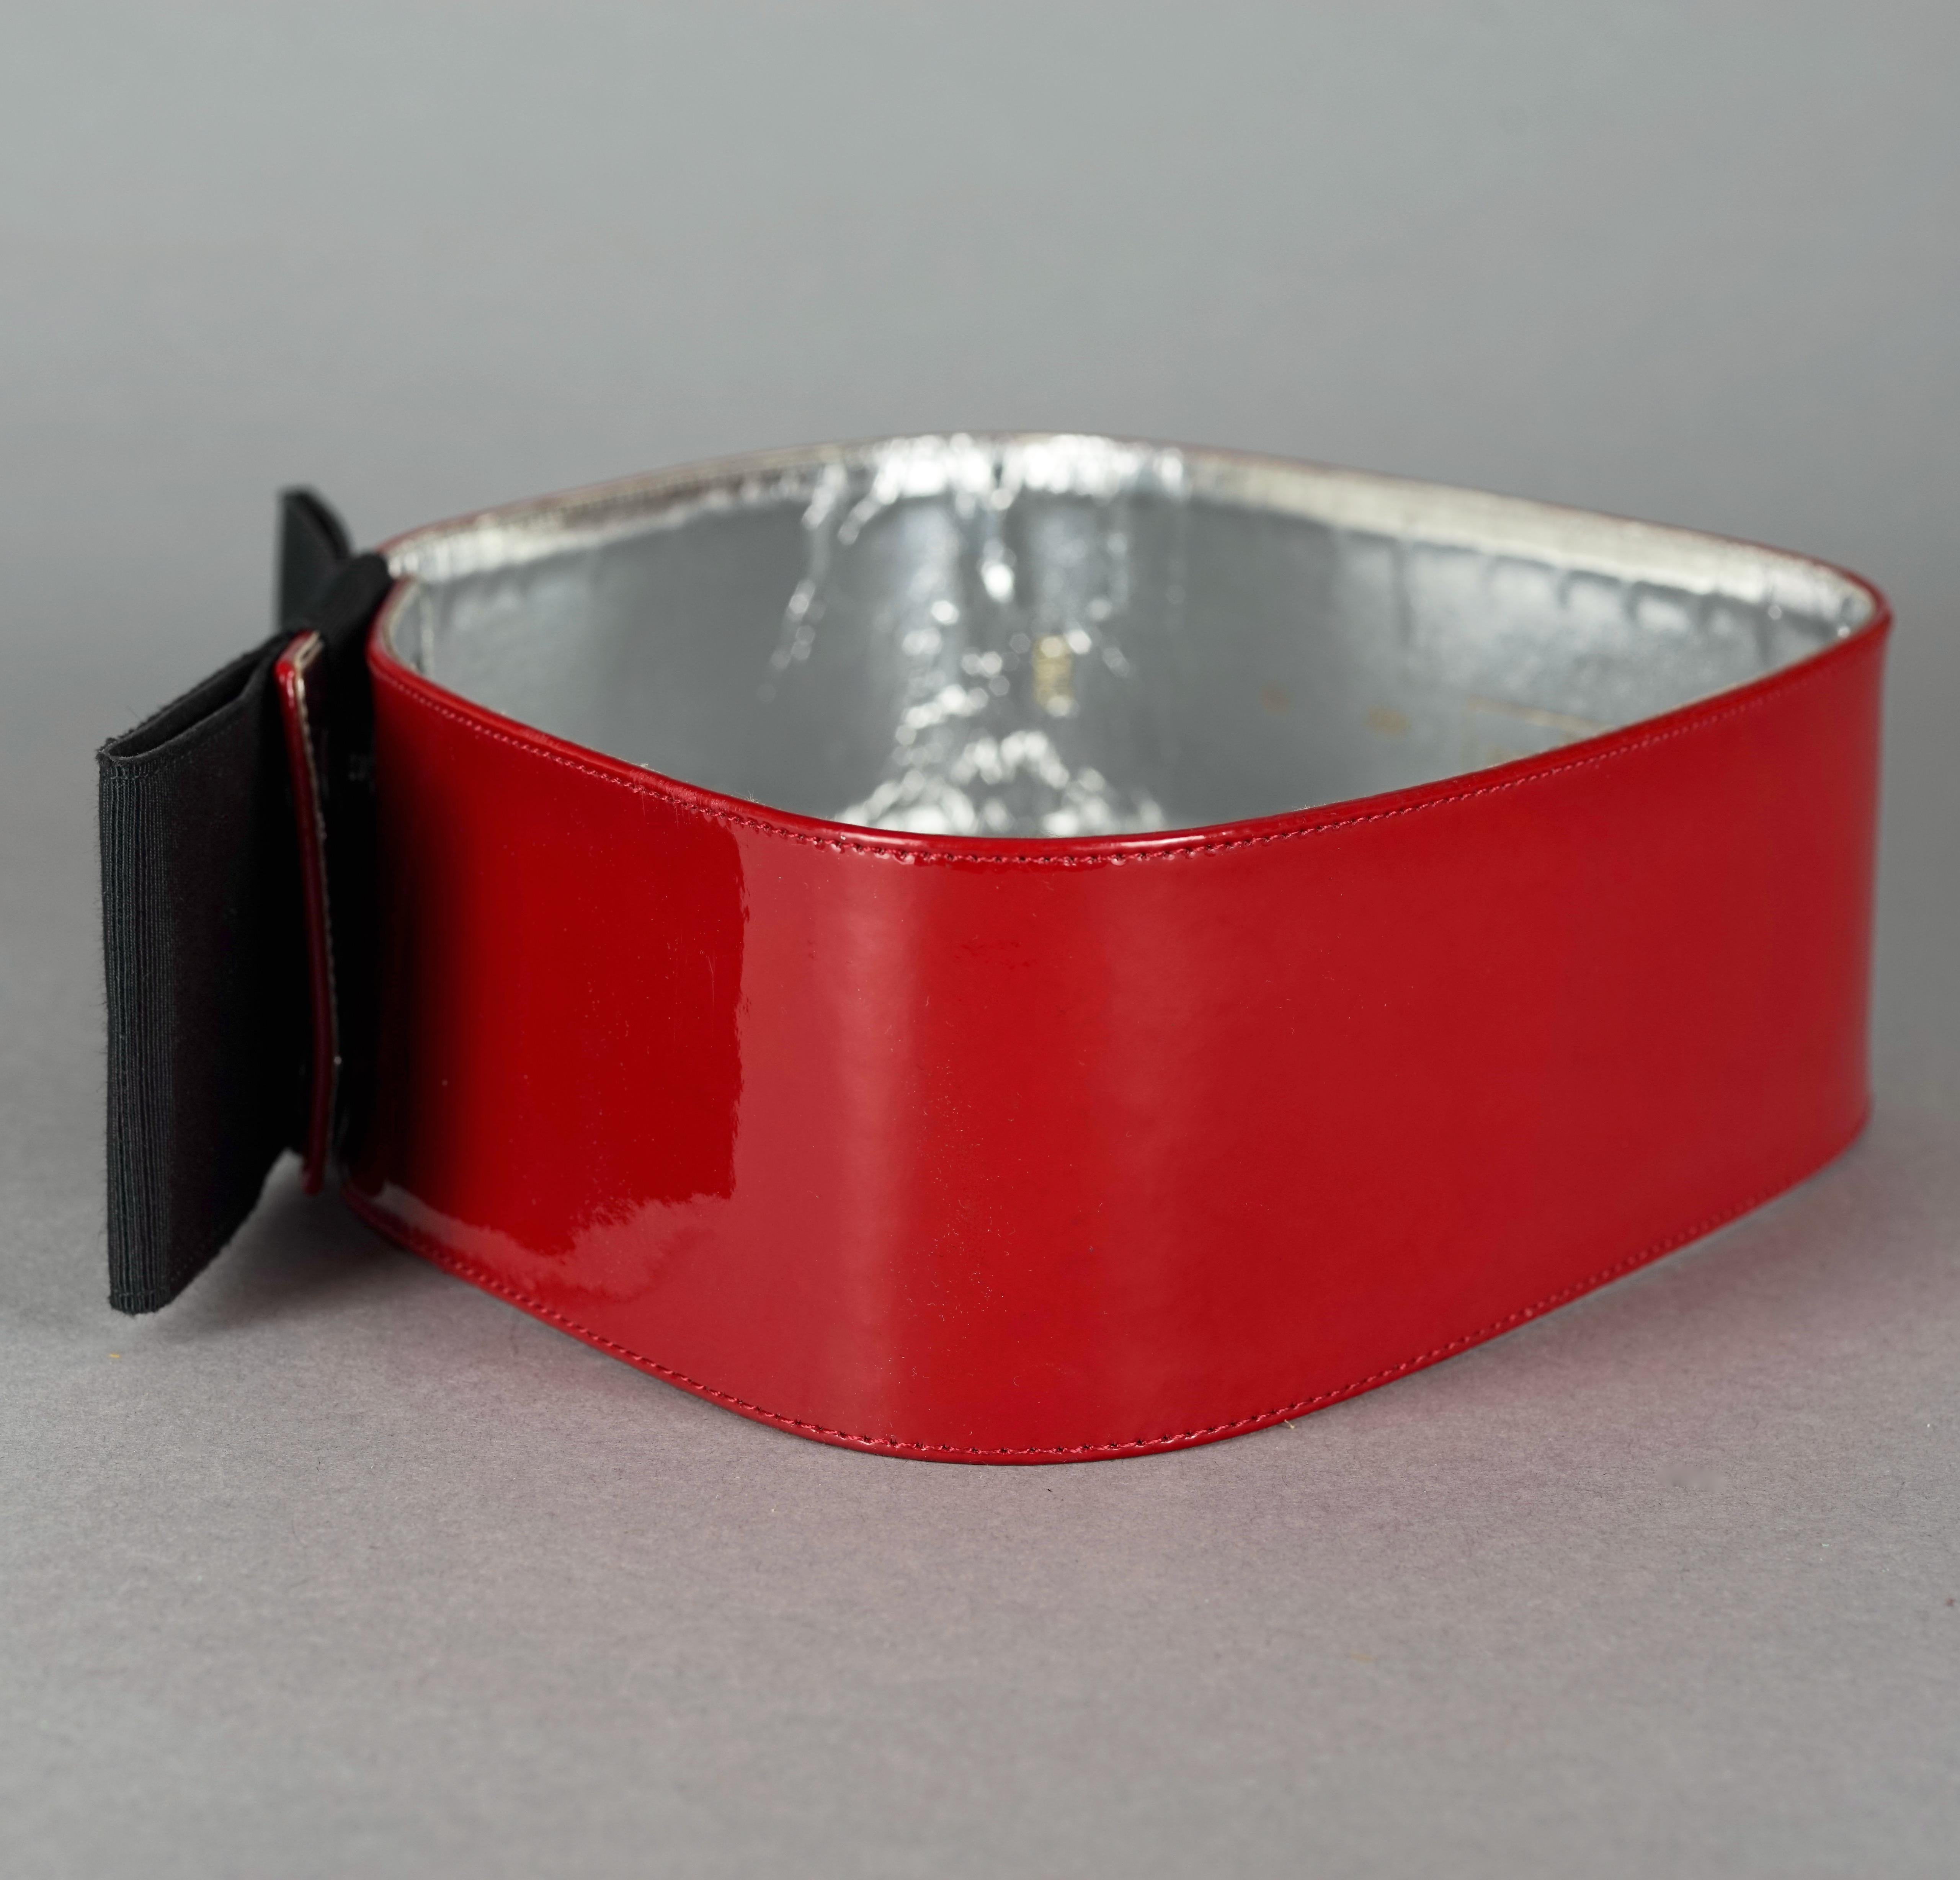 Vintage YVES SAINT LAURENT Ysl Black Bow Red Patent Belt In Good Condition For Sale In Kingersheim, Alsace